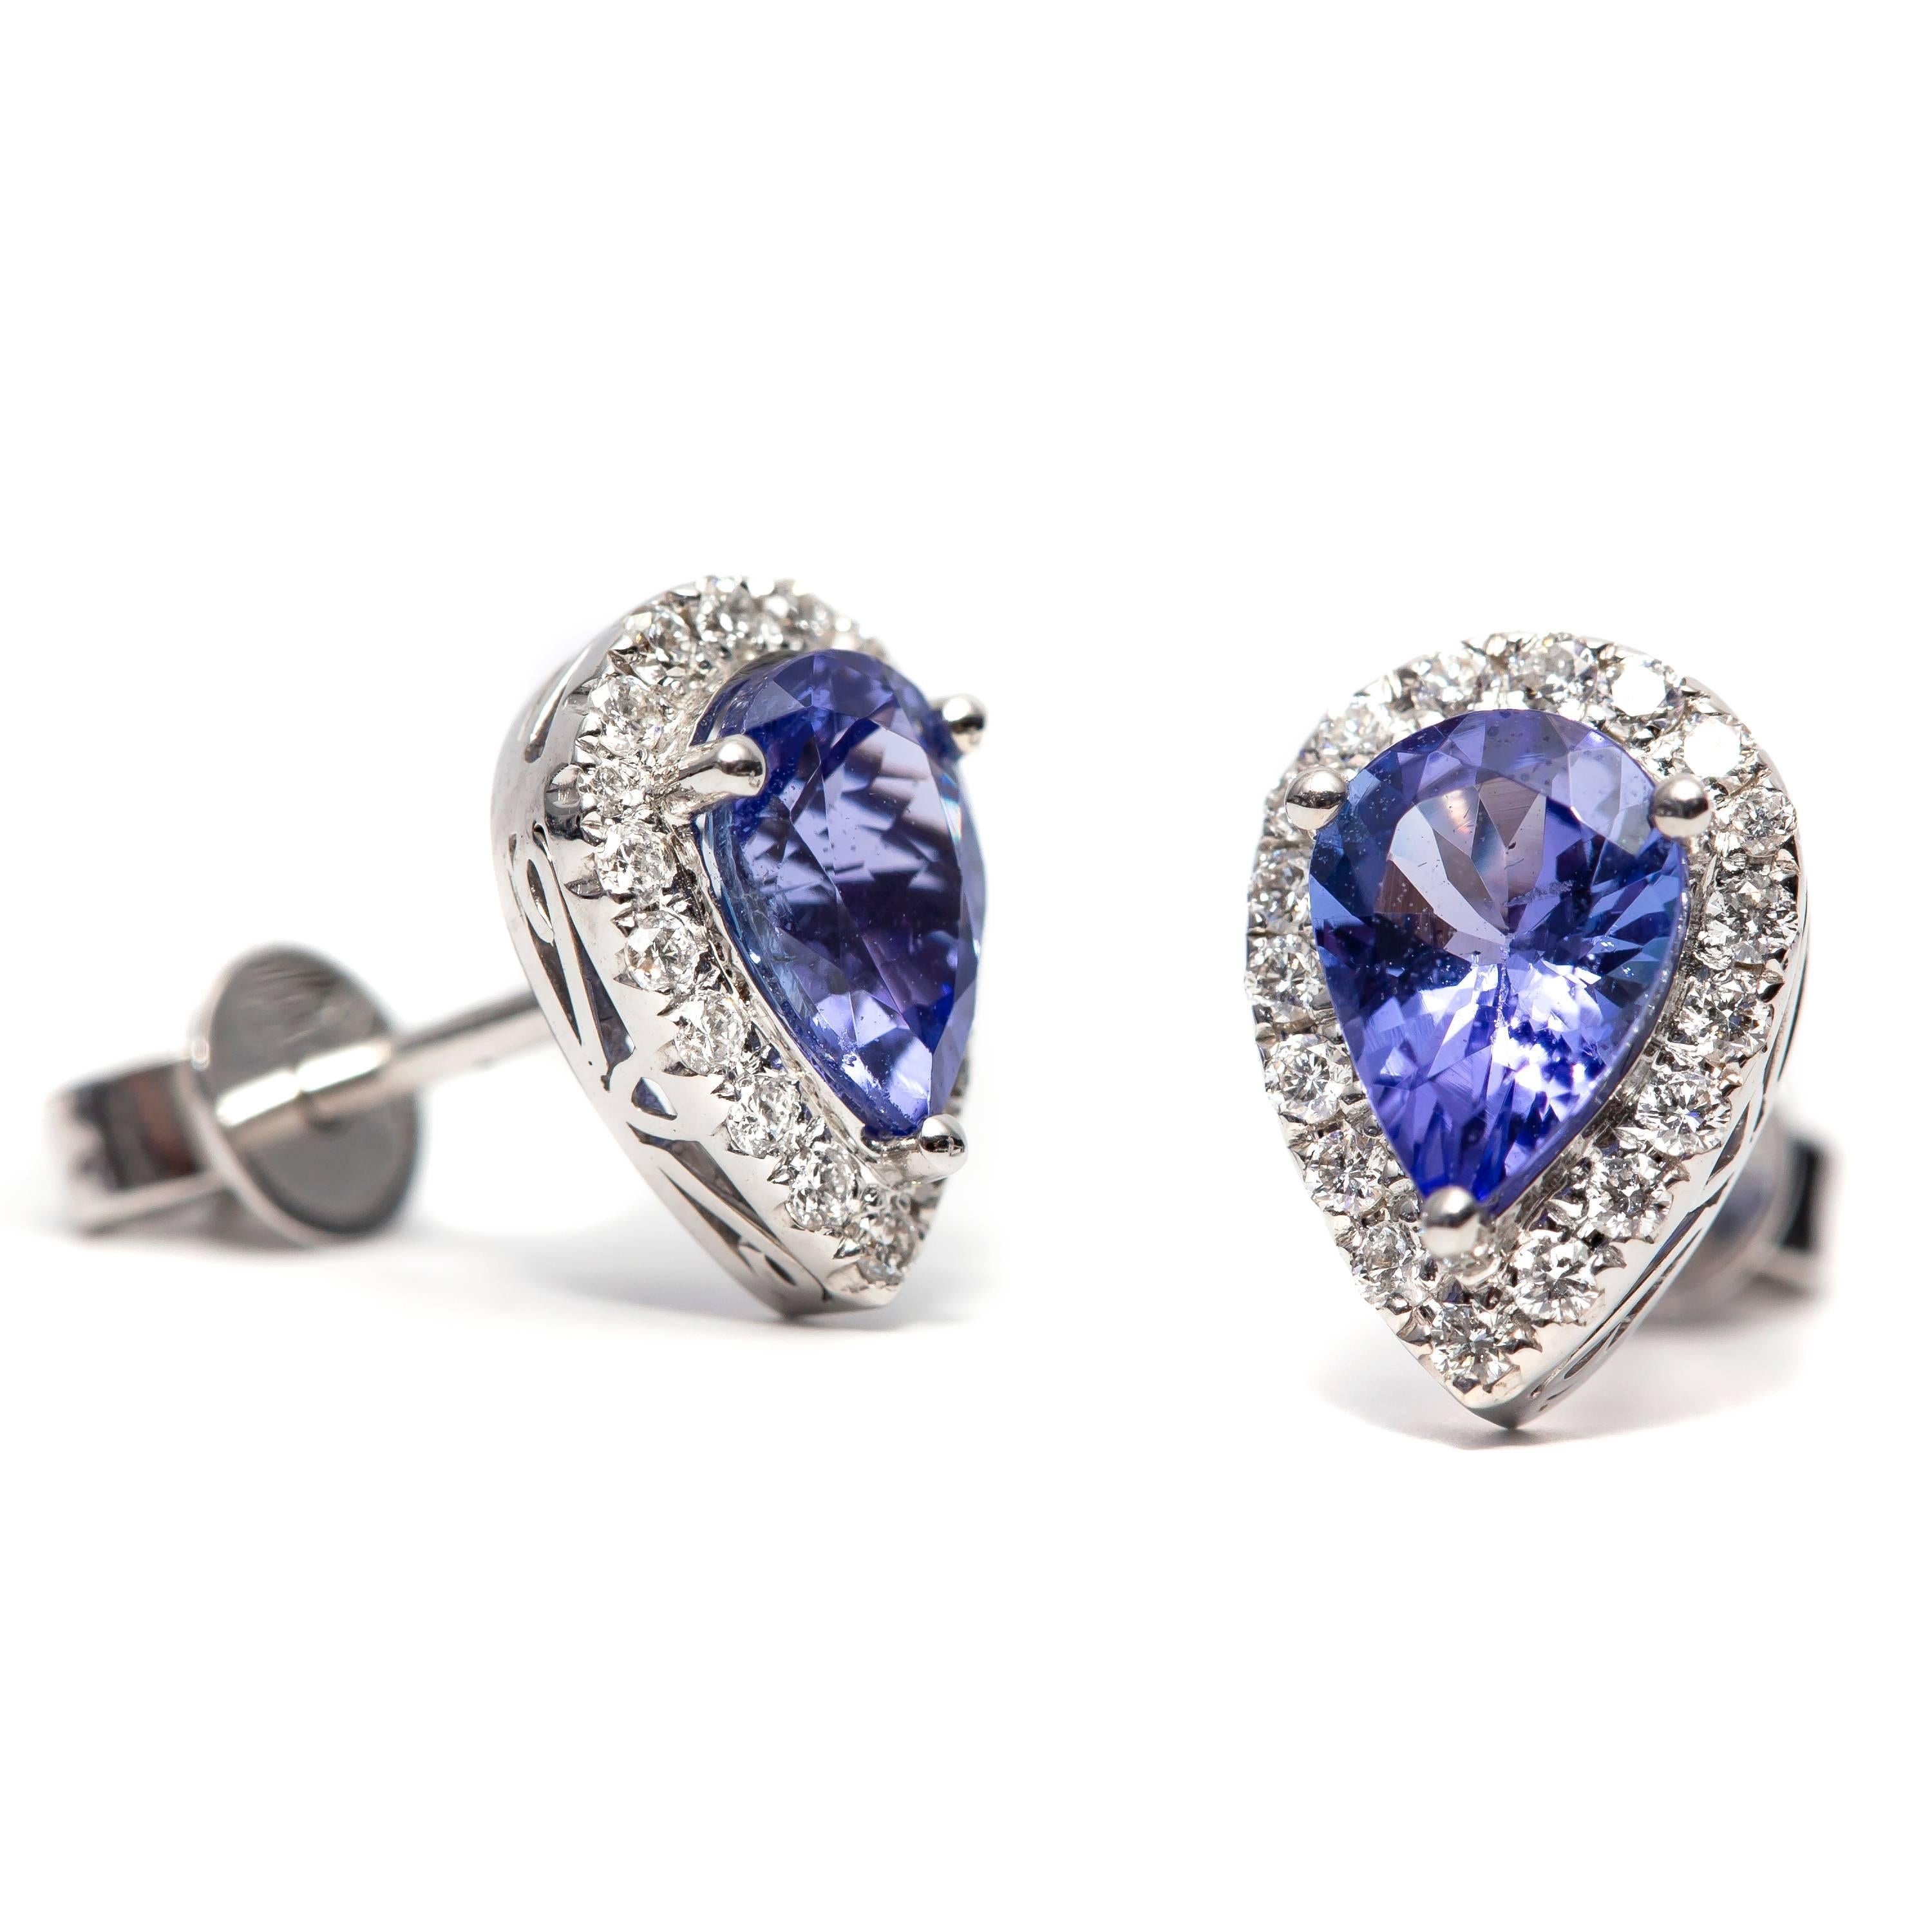 A beautiful pair of 1.42 Carat pear shaped tanzanite earrings featuring 0.30 Carats of color G clarity VS1 round White brilliant diamonds. Set in 18 Karat White Gold. These earrings are available in other carat sizes. As well as 18 Karat Yellow and